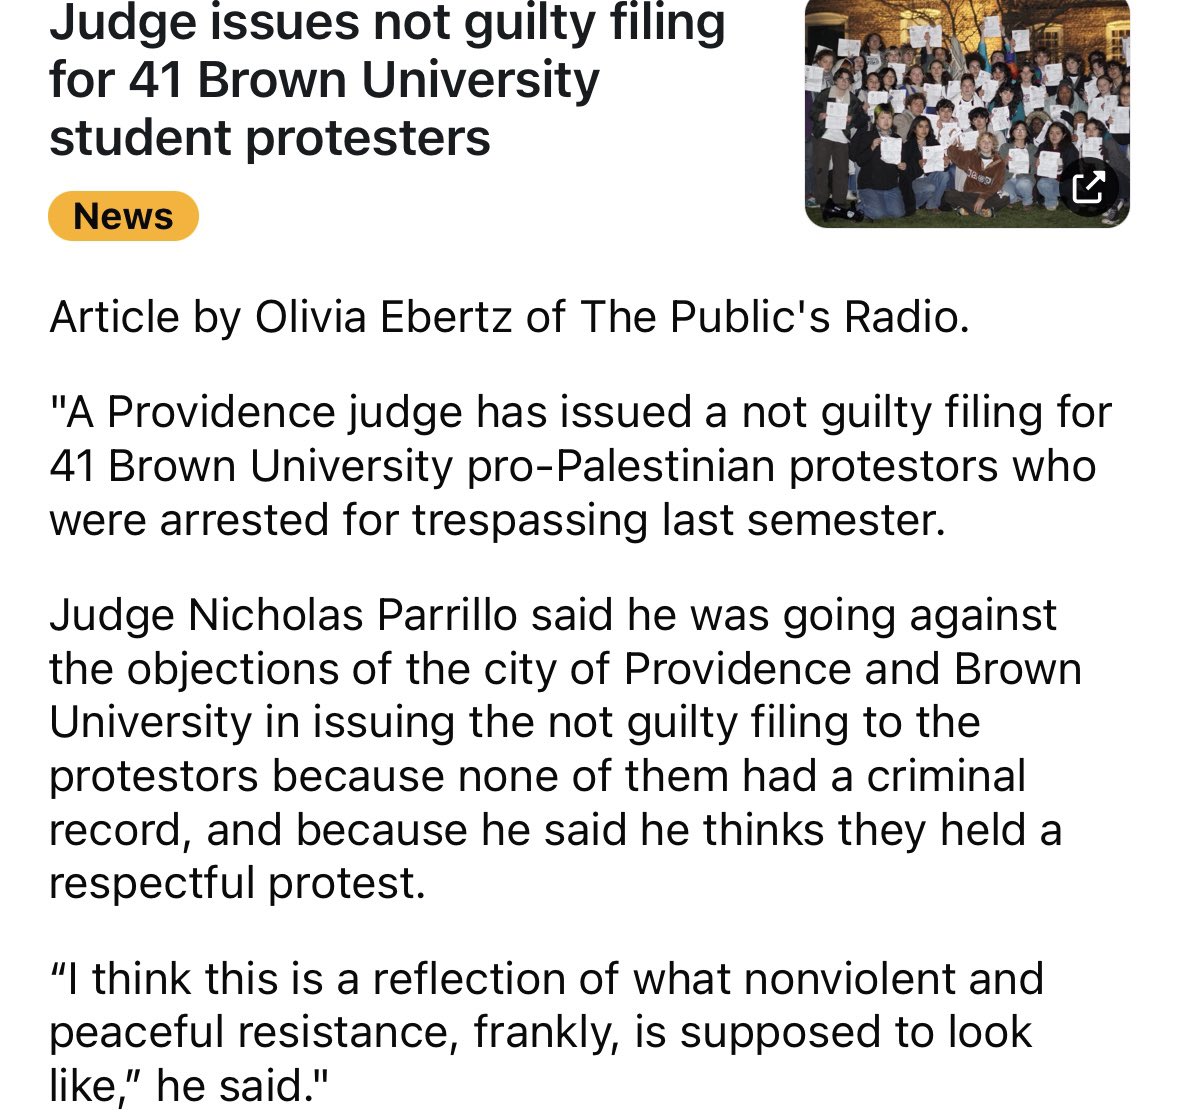 “Judge Nicholas Parrillo said he was going against the objections of the city of Providence and Brown University in issuing the not guilty filing to the protestors”